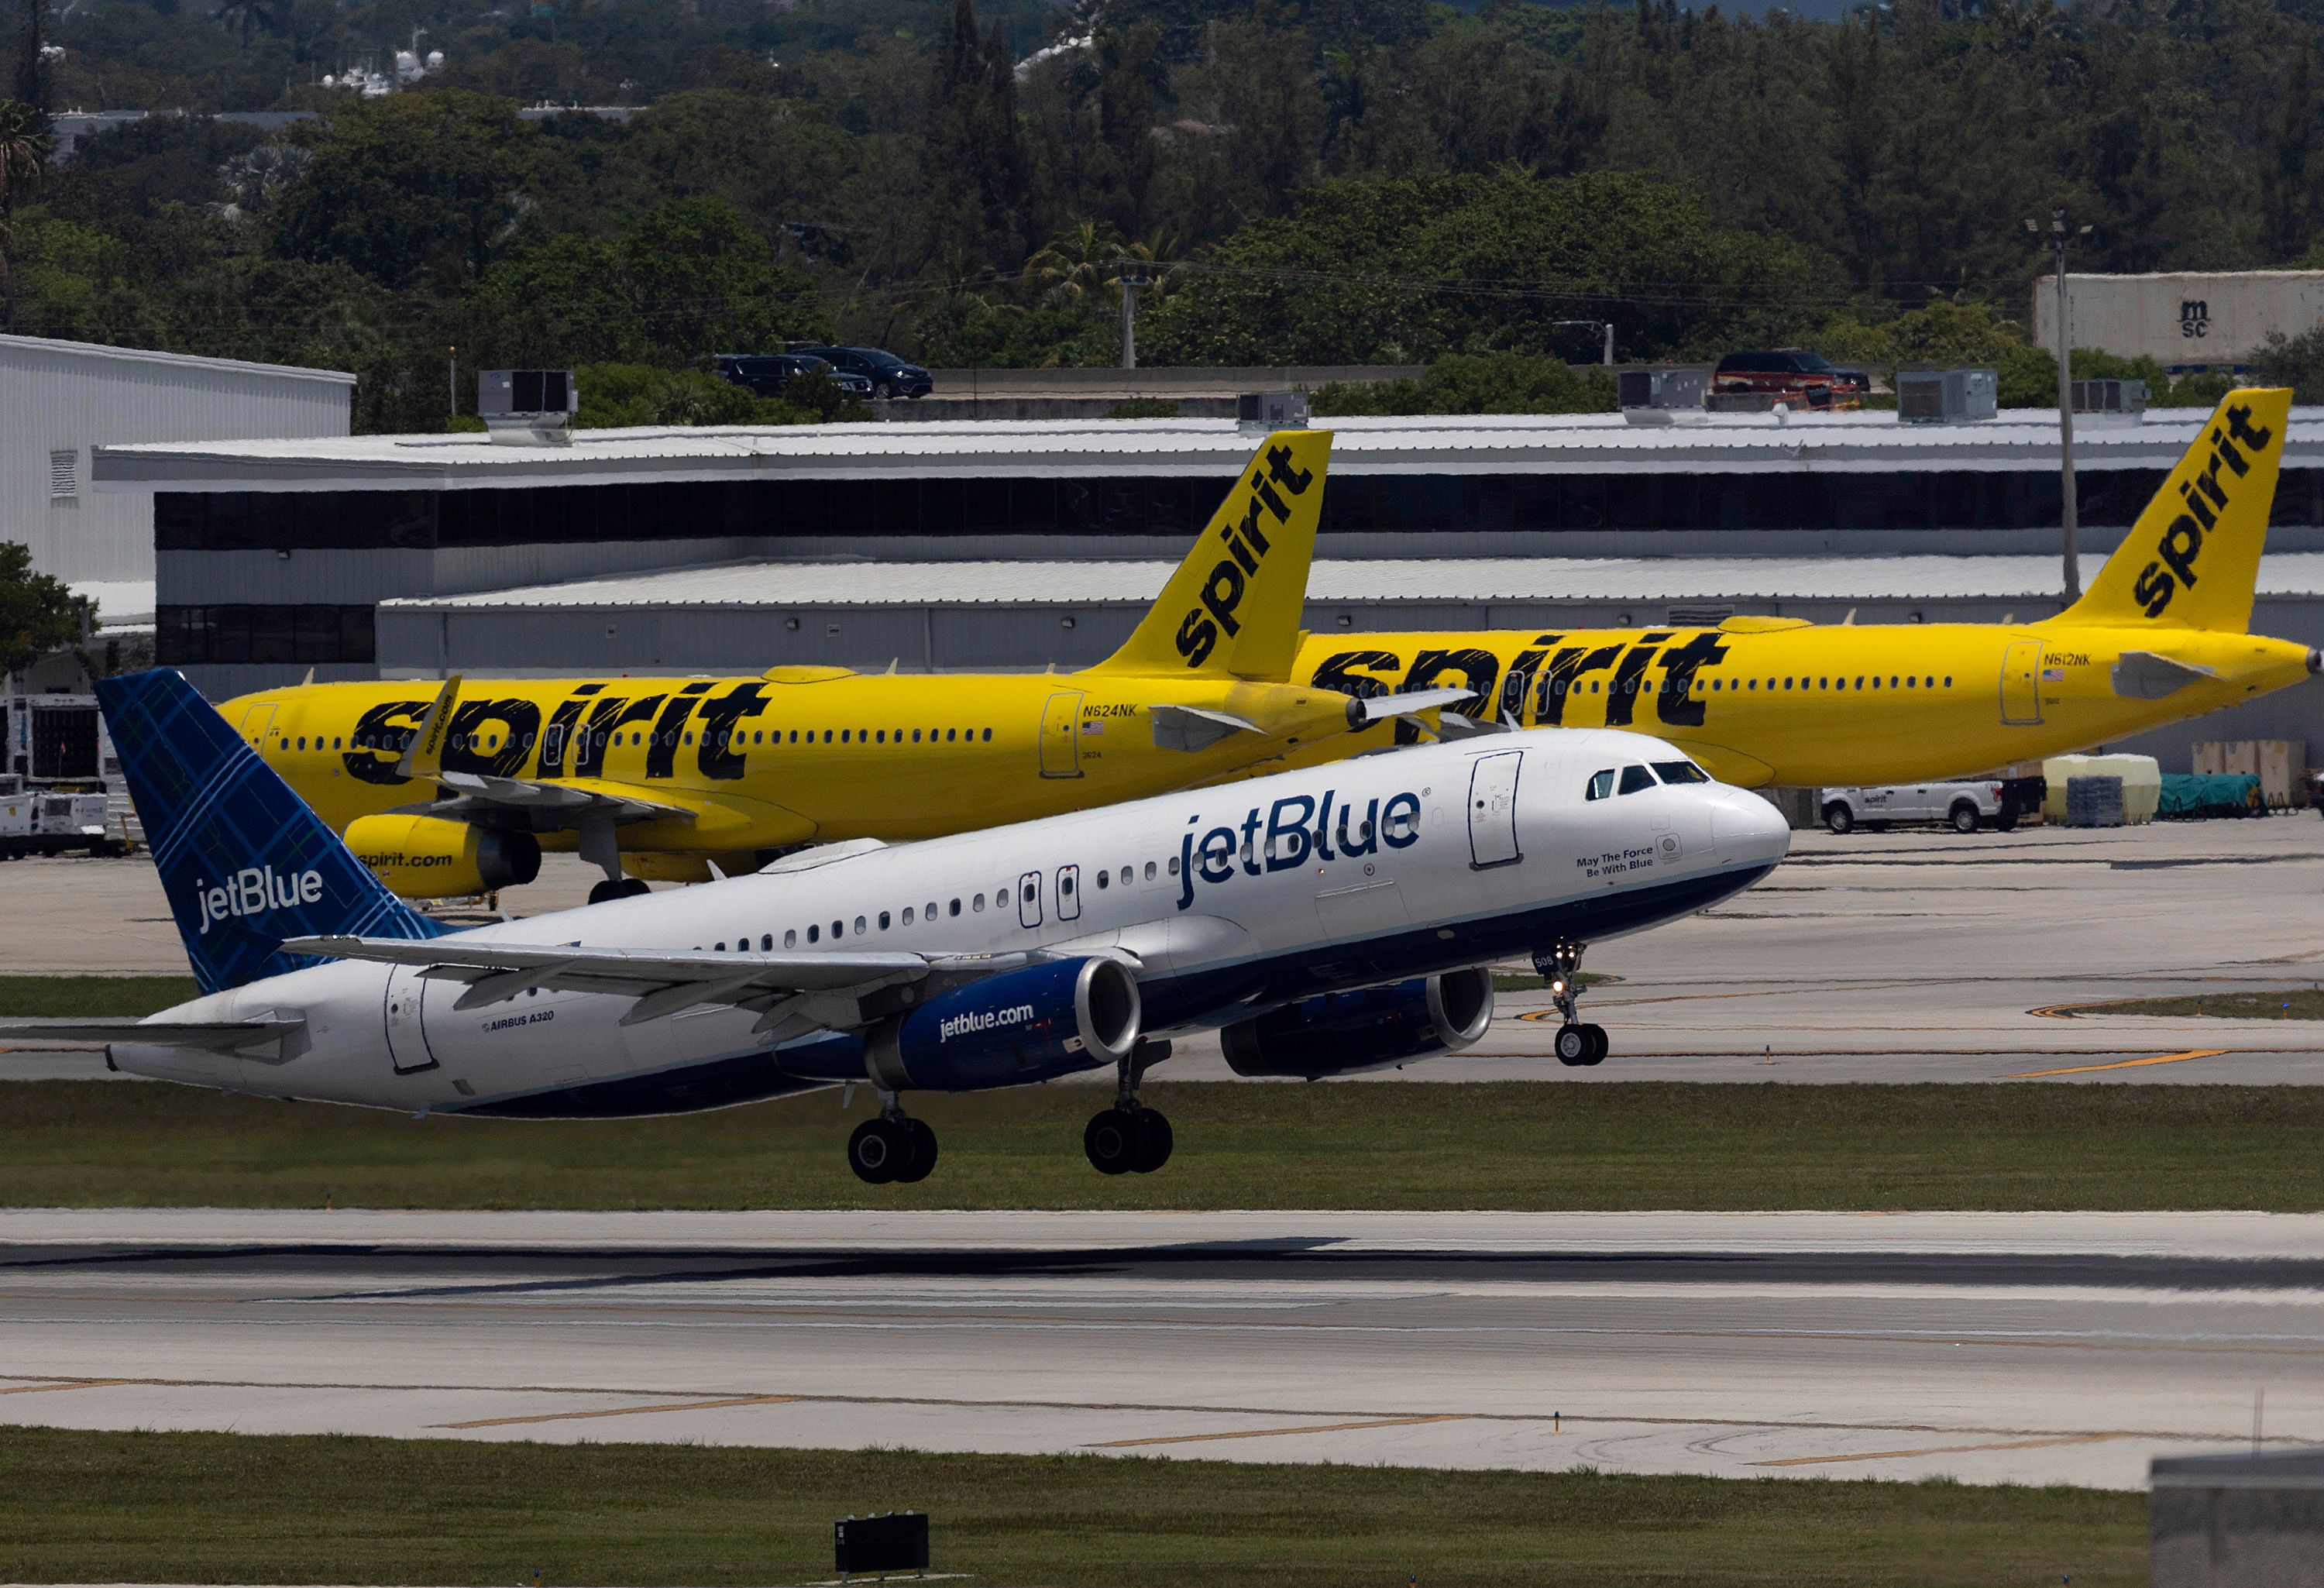 A JetBlue Airbus Takes Off From Fort Lauderdale In Front of Two Spirit Airbuses